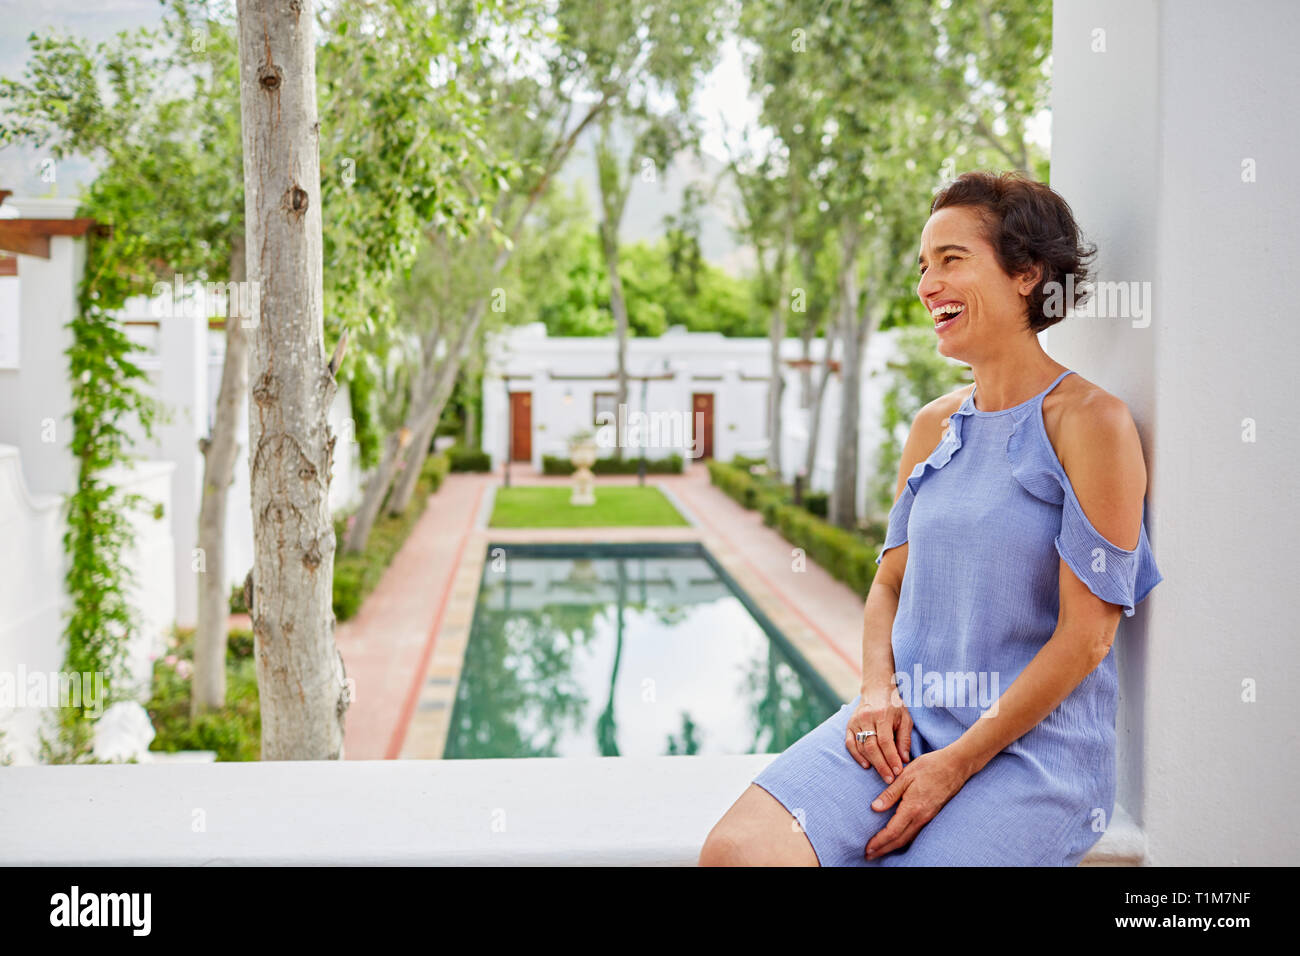 Laughing, carefree woman on hotel balcony Stock Photo